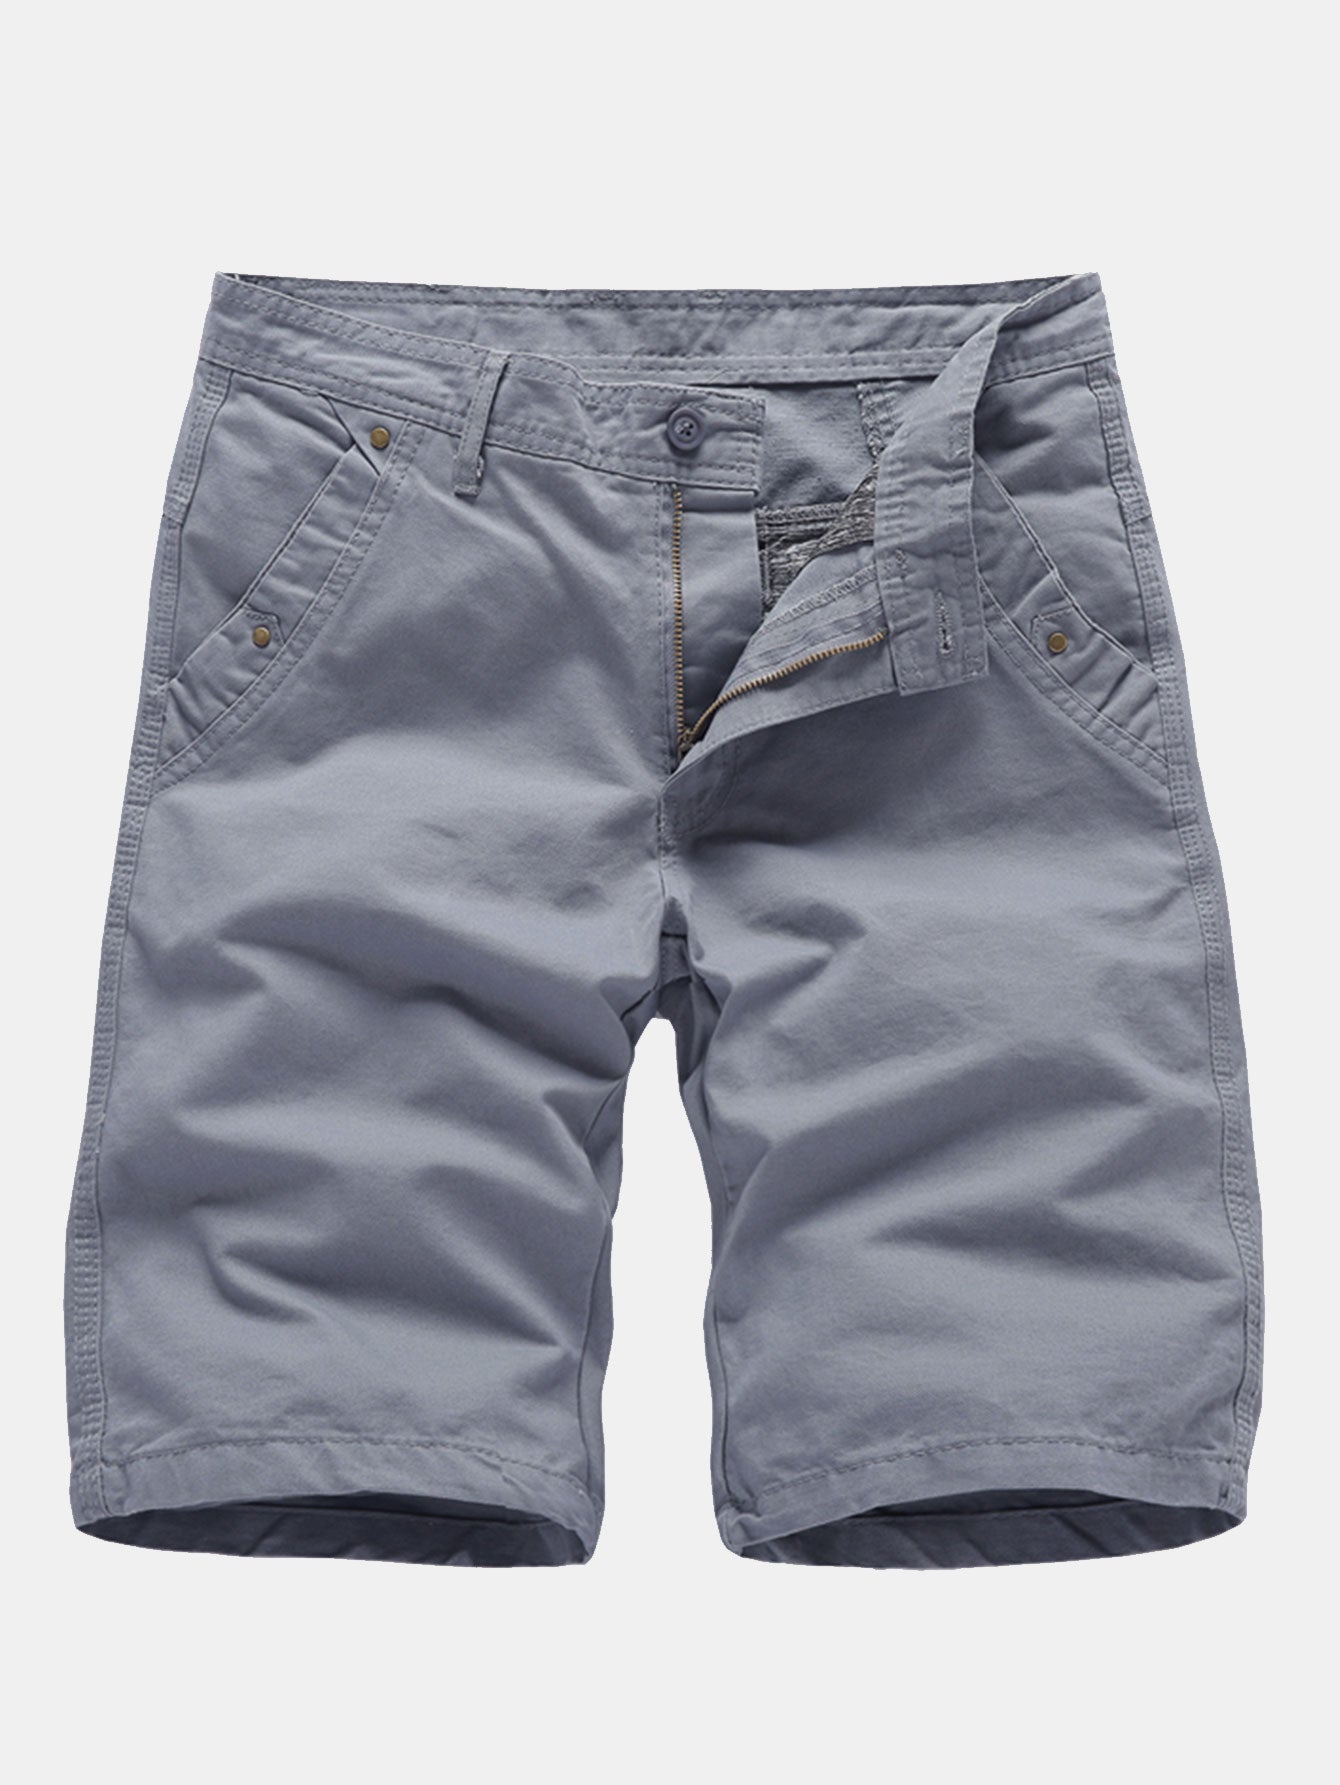 Chino Shorts with Stud Pockets for Men